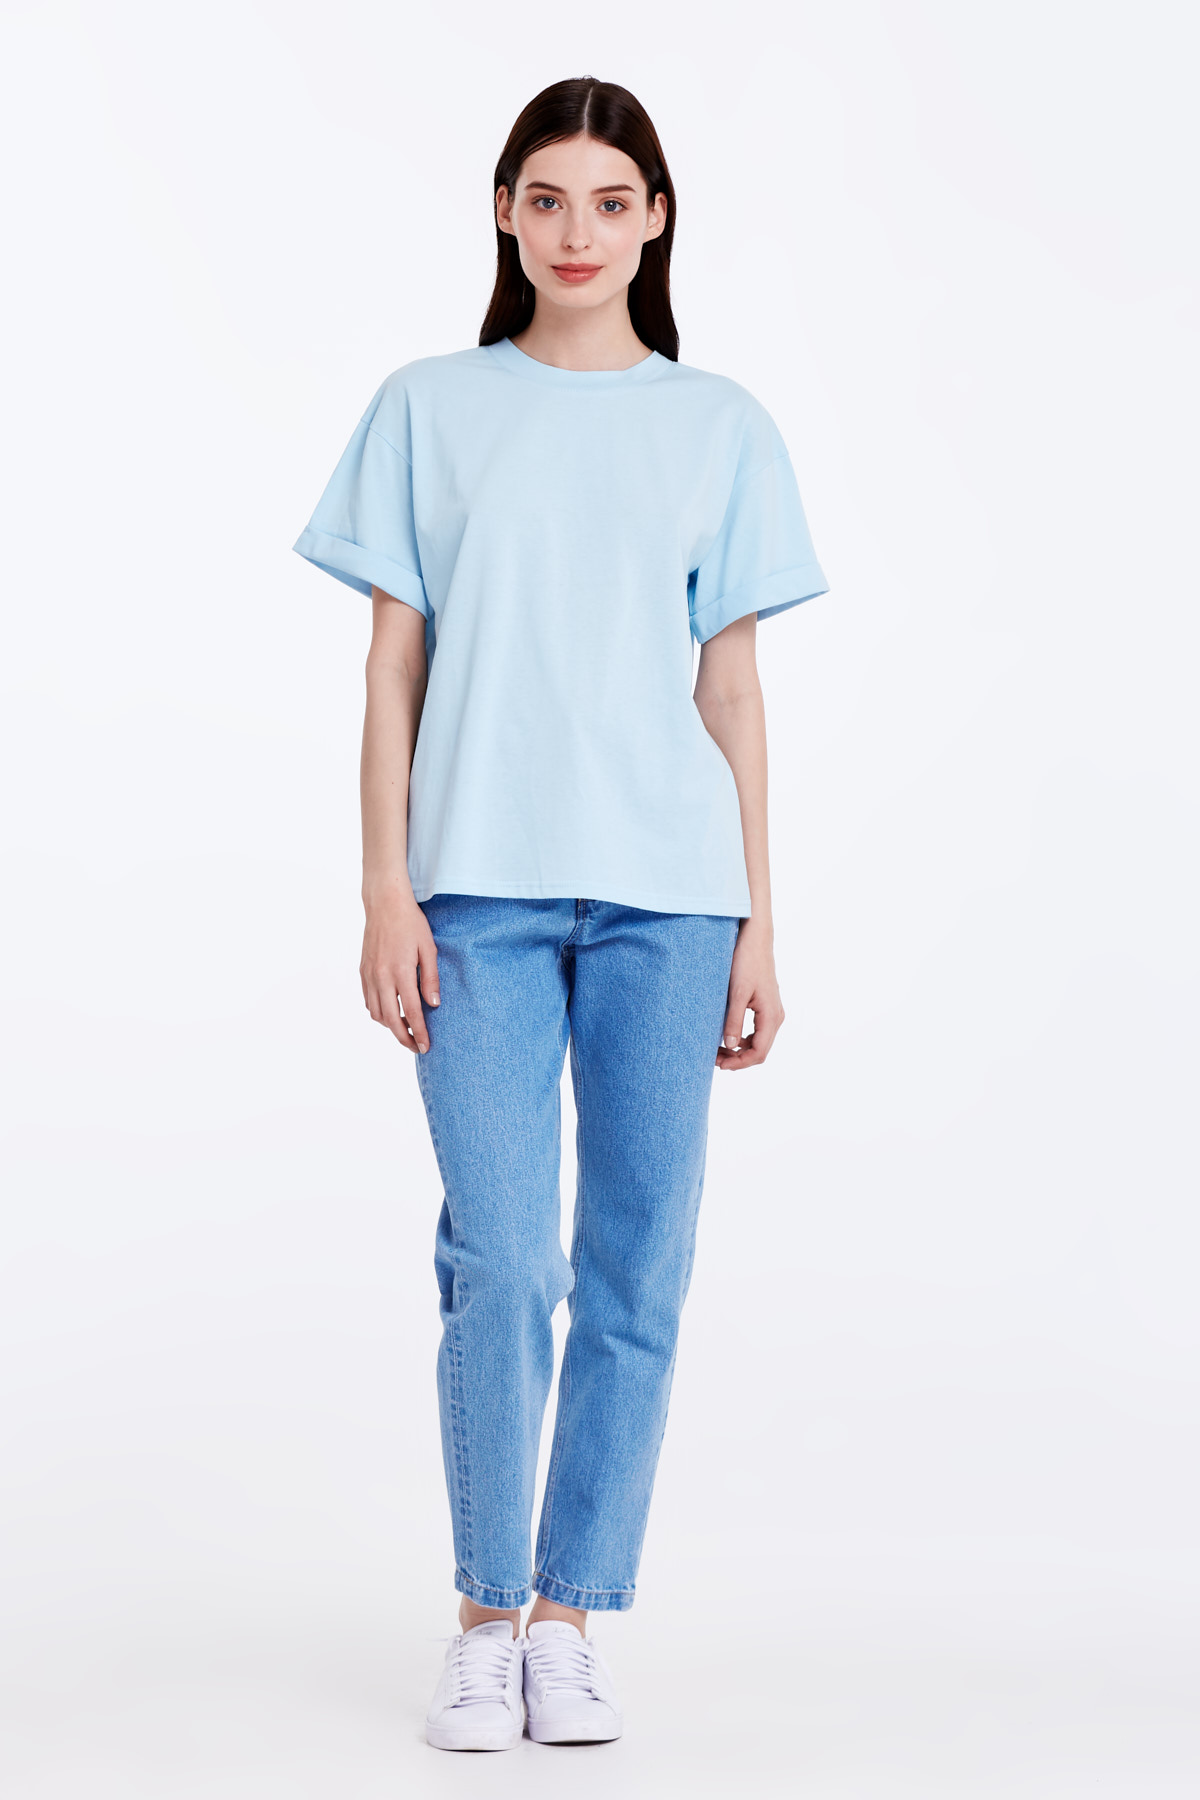 Loose-fitting blue T-shirt with cuffs, photo 2